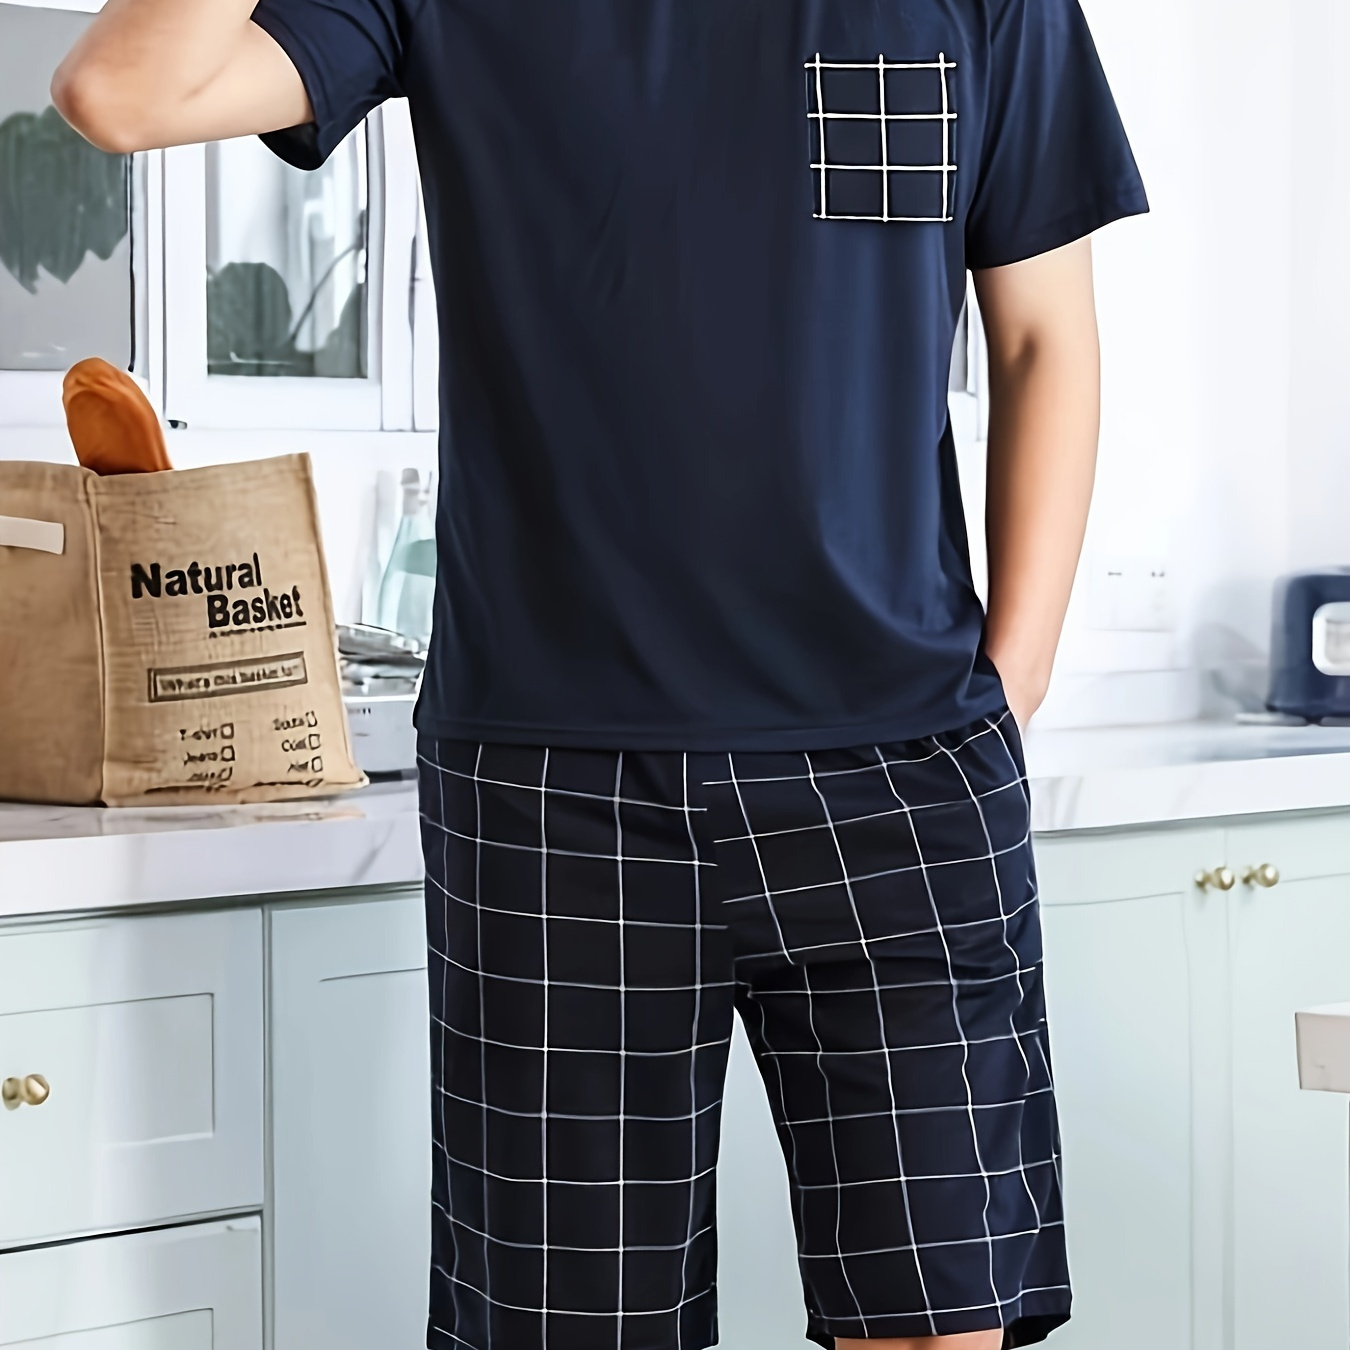 

Men's Trendy Casual Comfy Tees & Shorts, Solid Crew Neck Short Sleeve With Chest Pocket T-shirt & Loose Shorts Home Pajamas Sets, Casual Sets For Summer